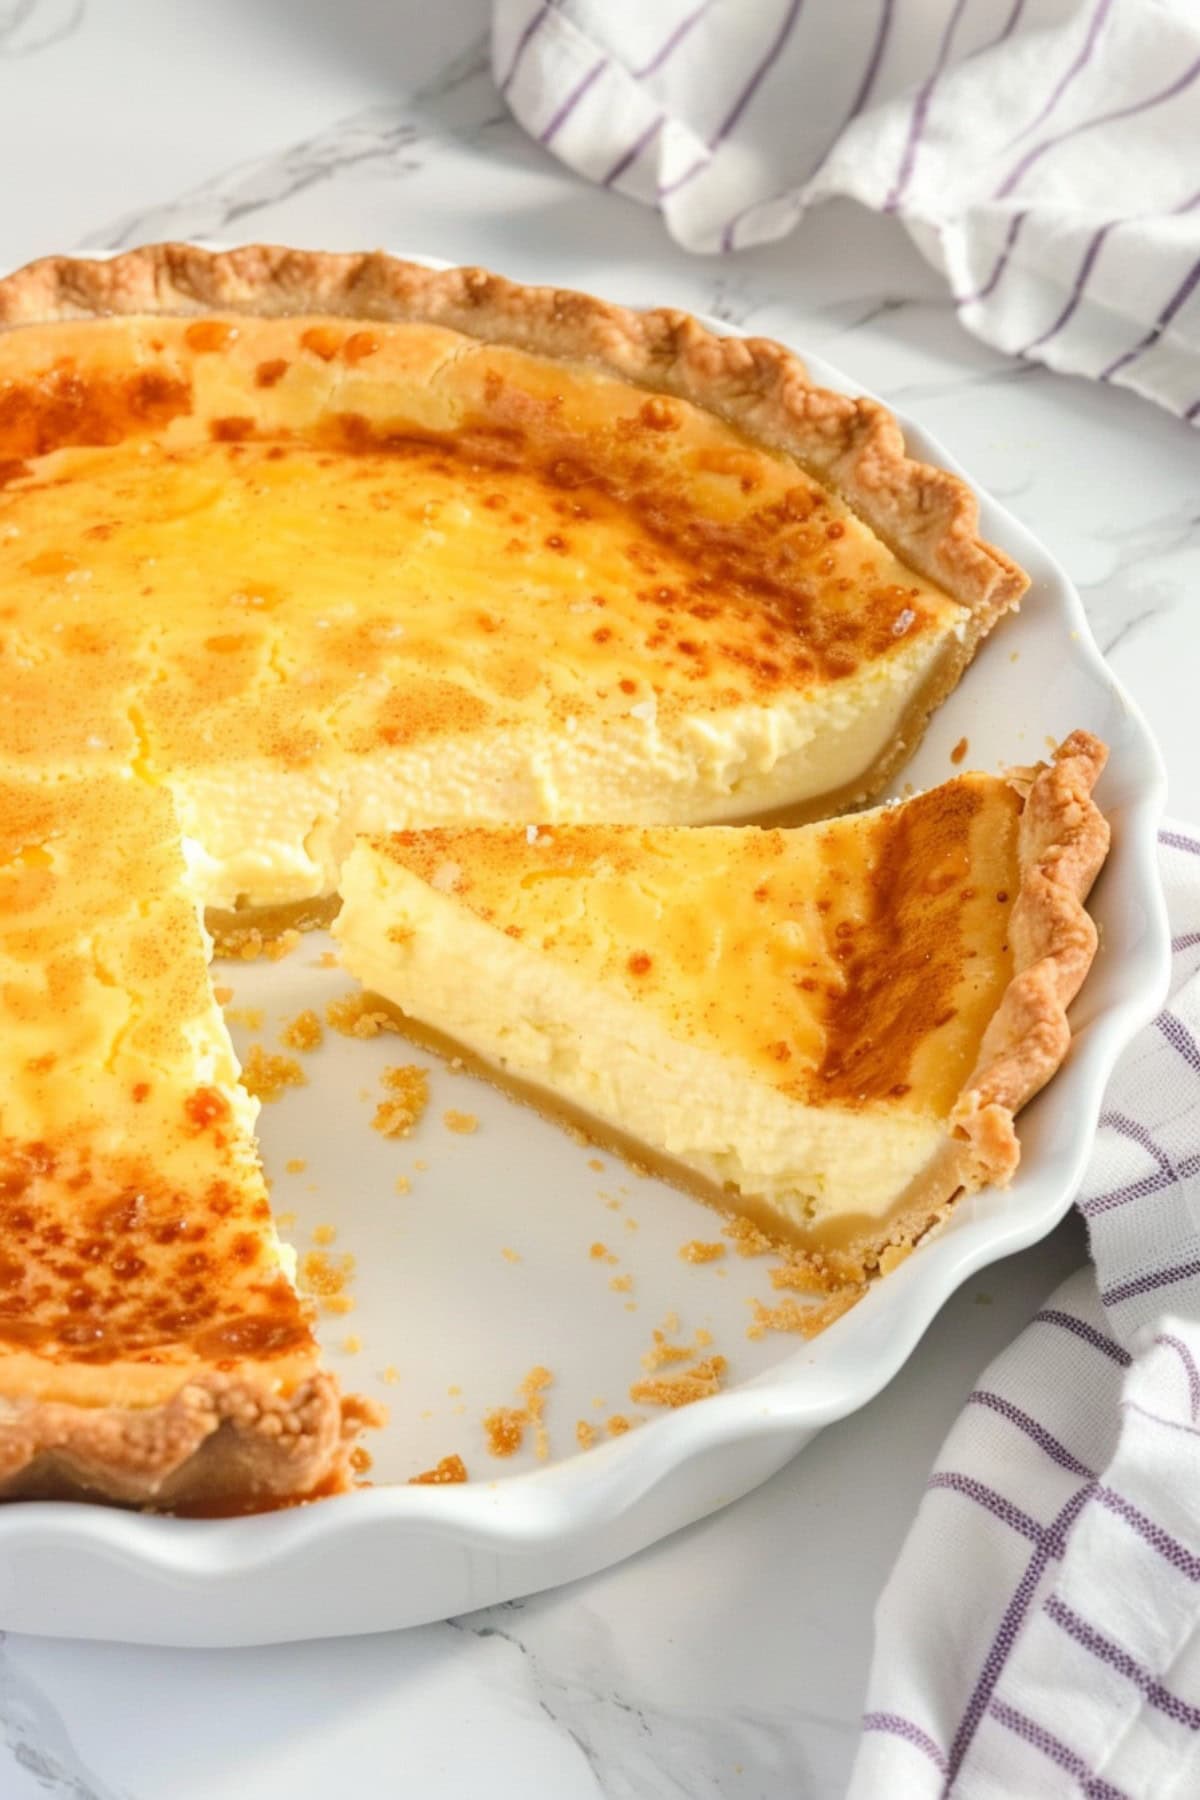 Indulgent custard pie with a flaky crust, ready to be sliced